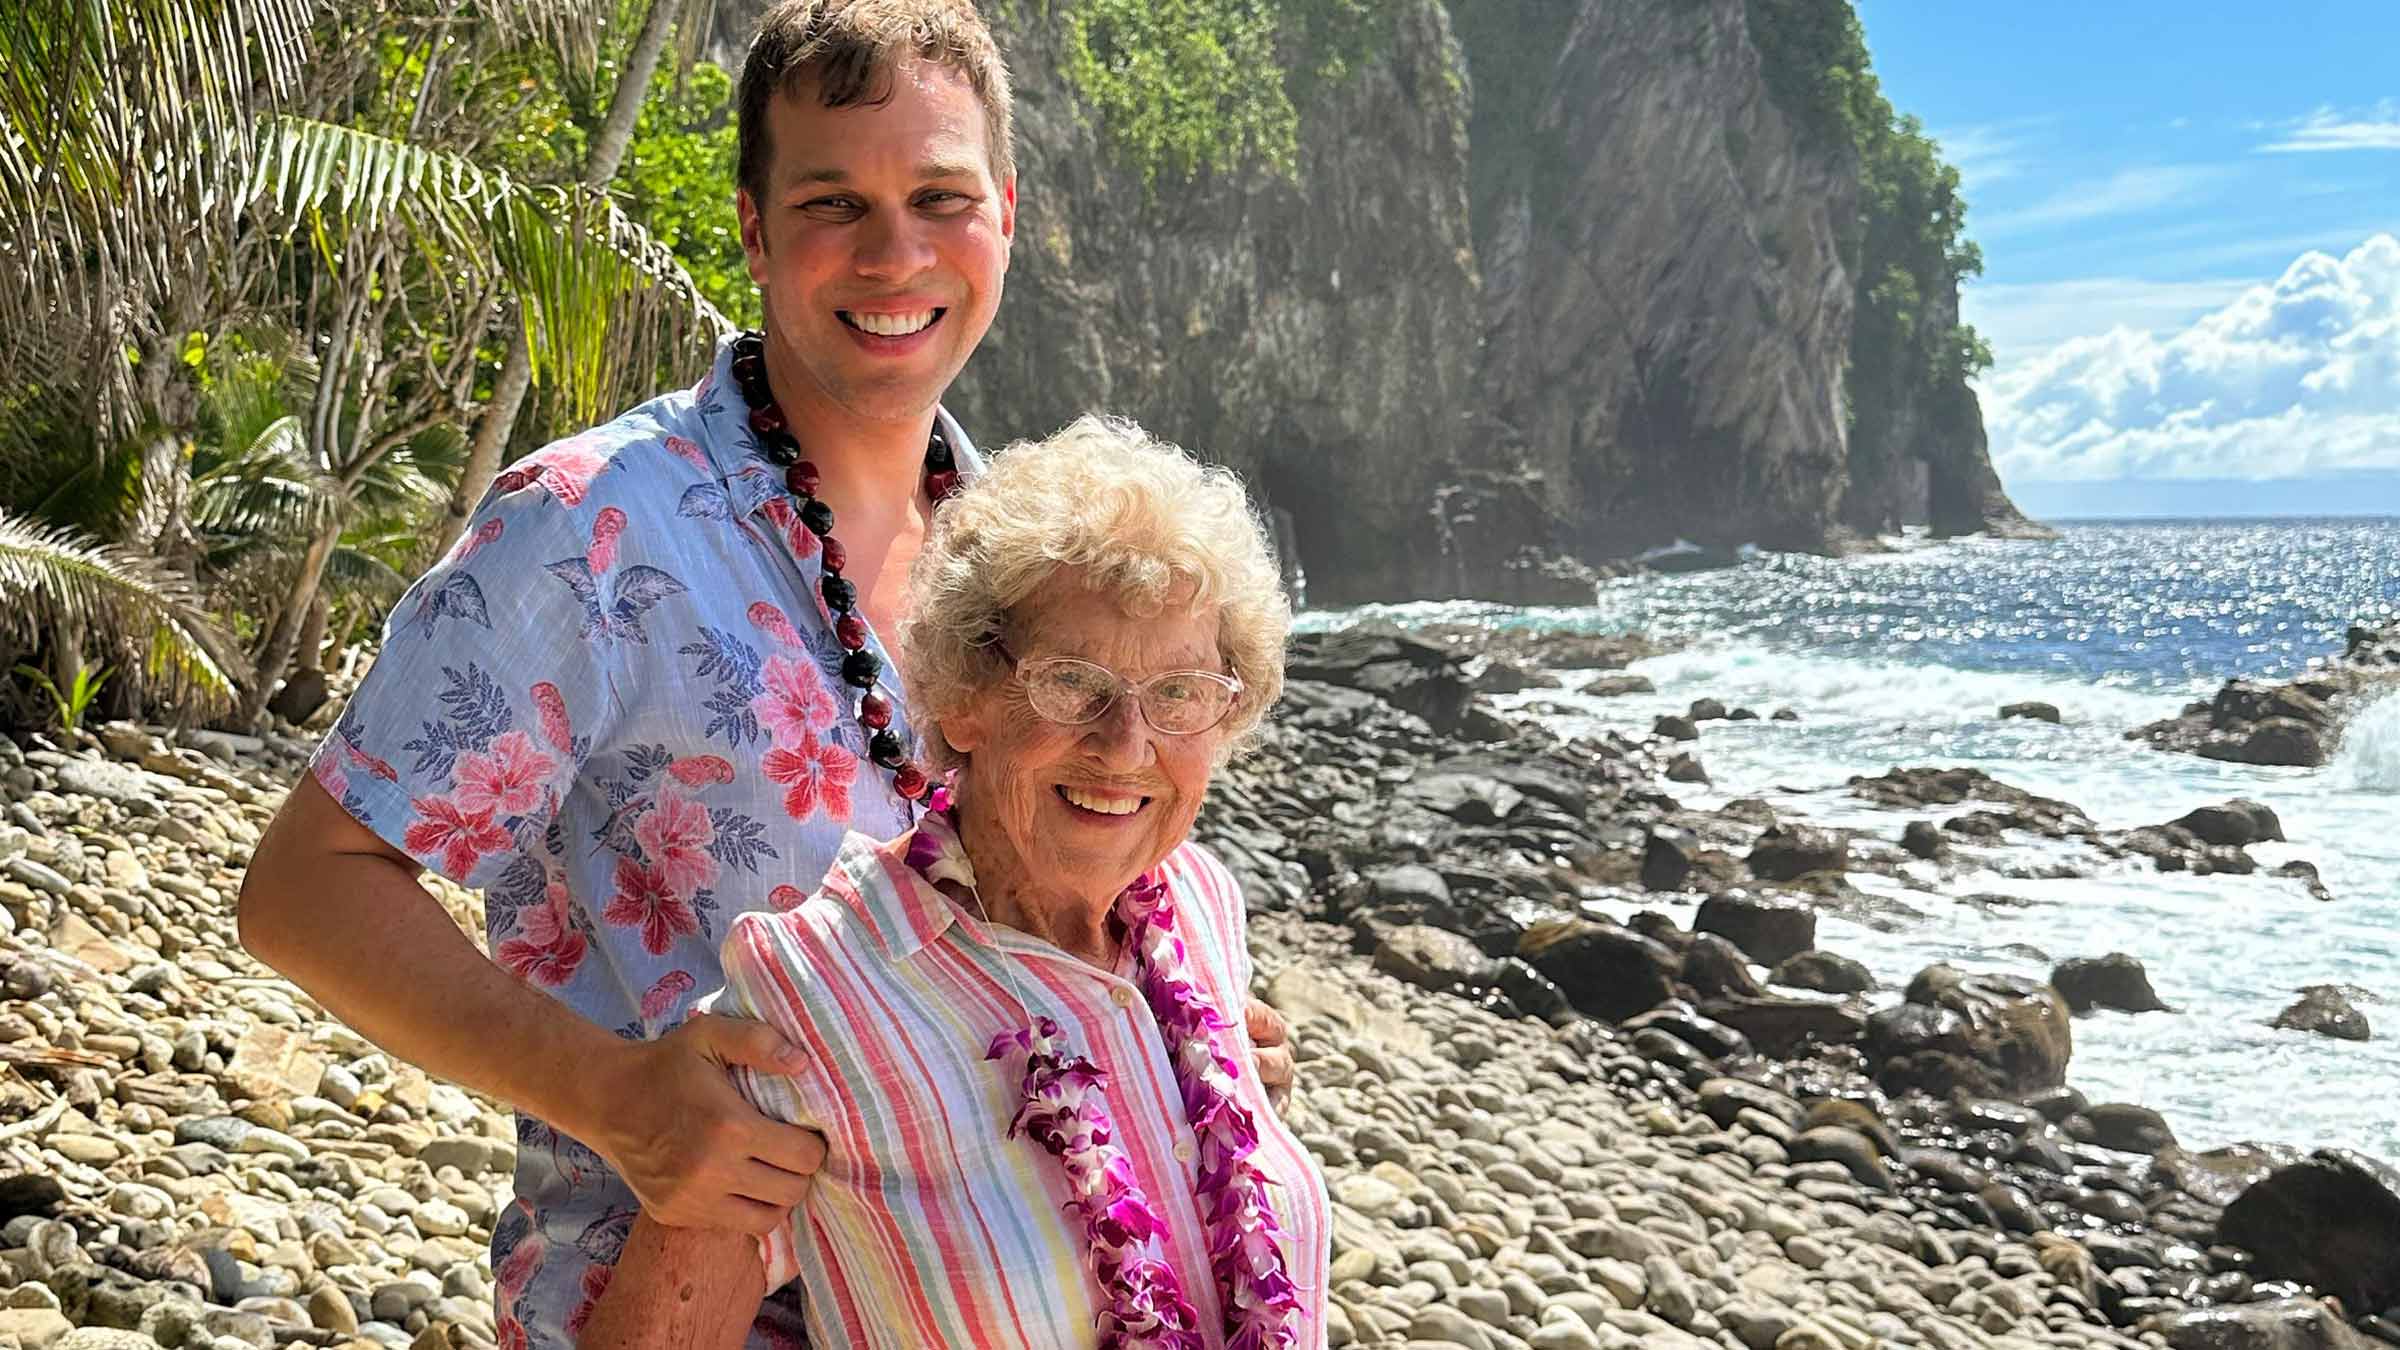 Brad Ryan and his grandmother by the ocean